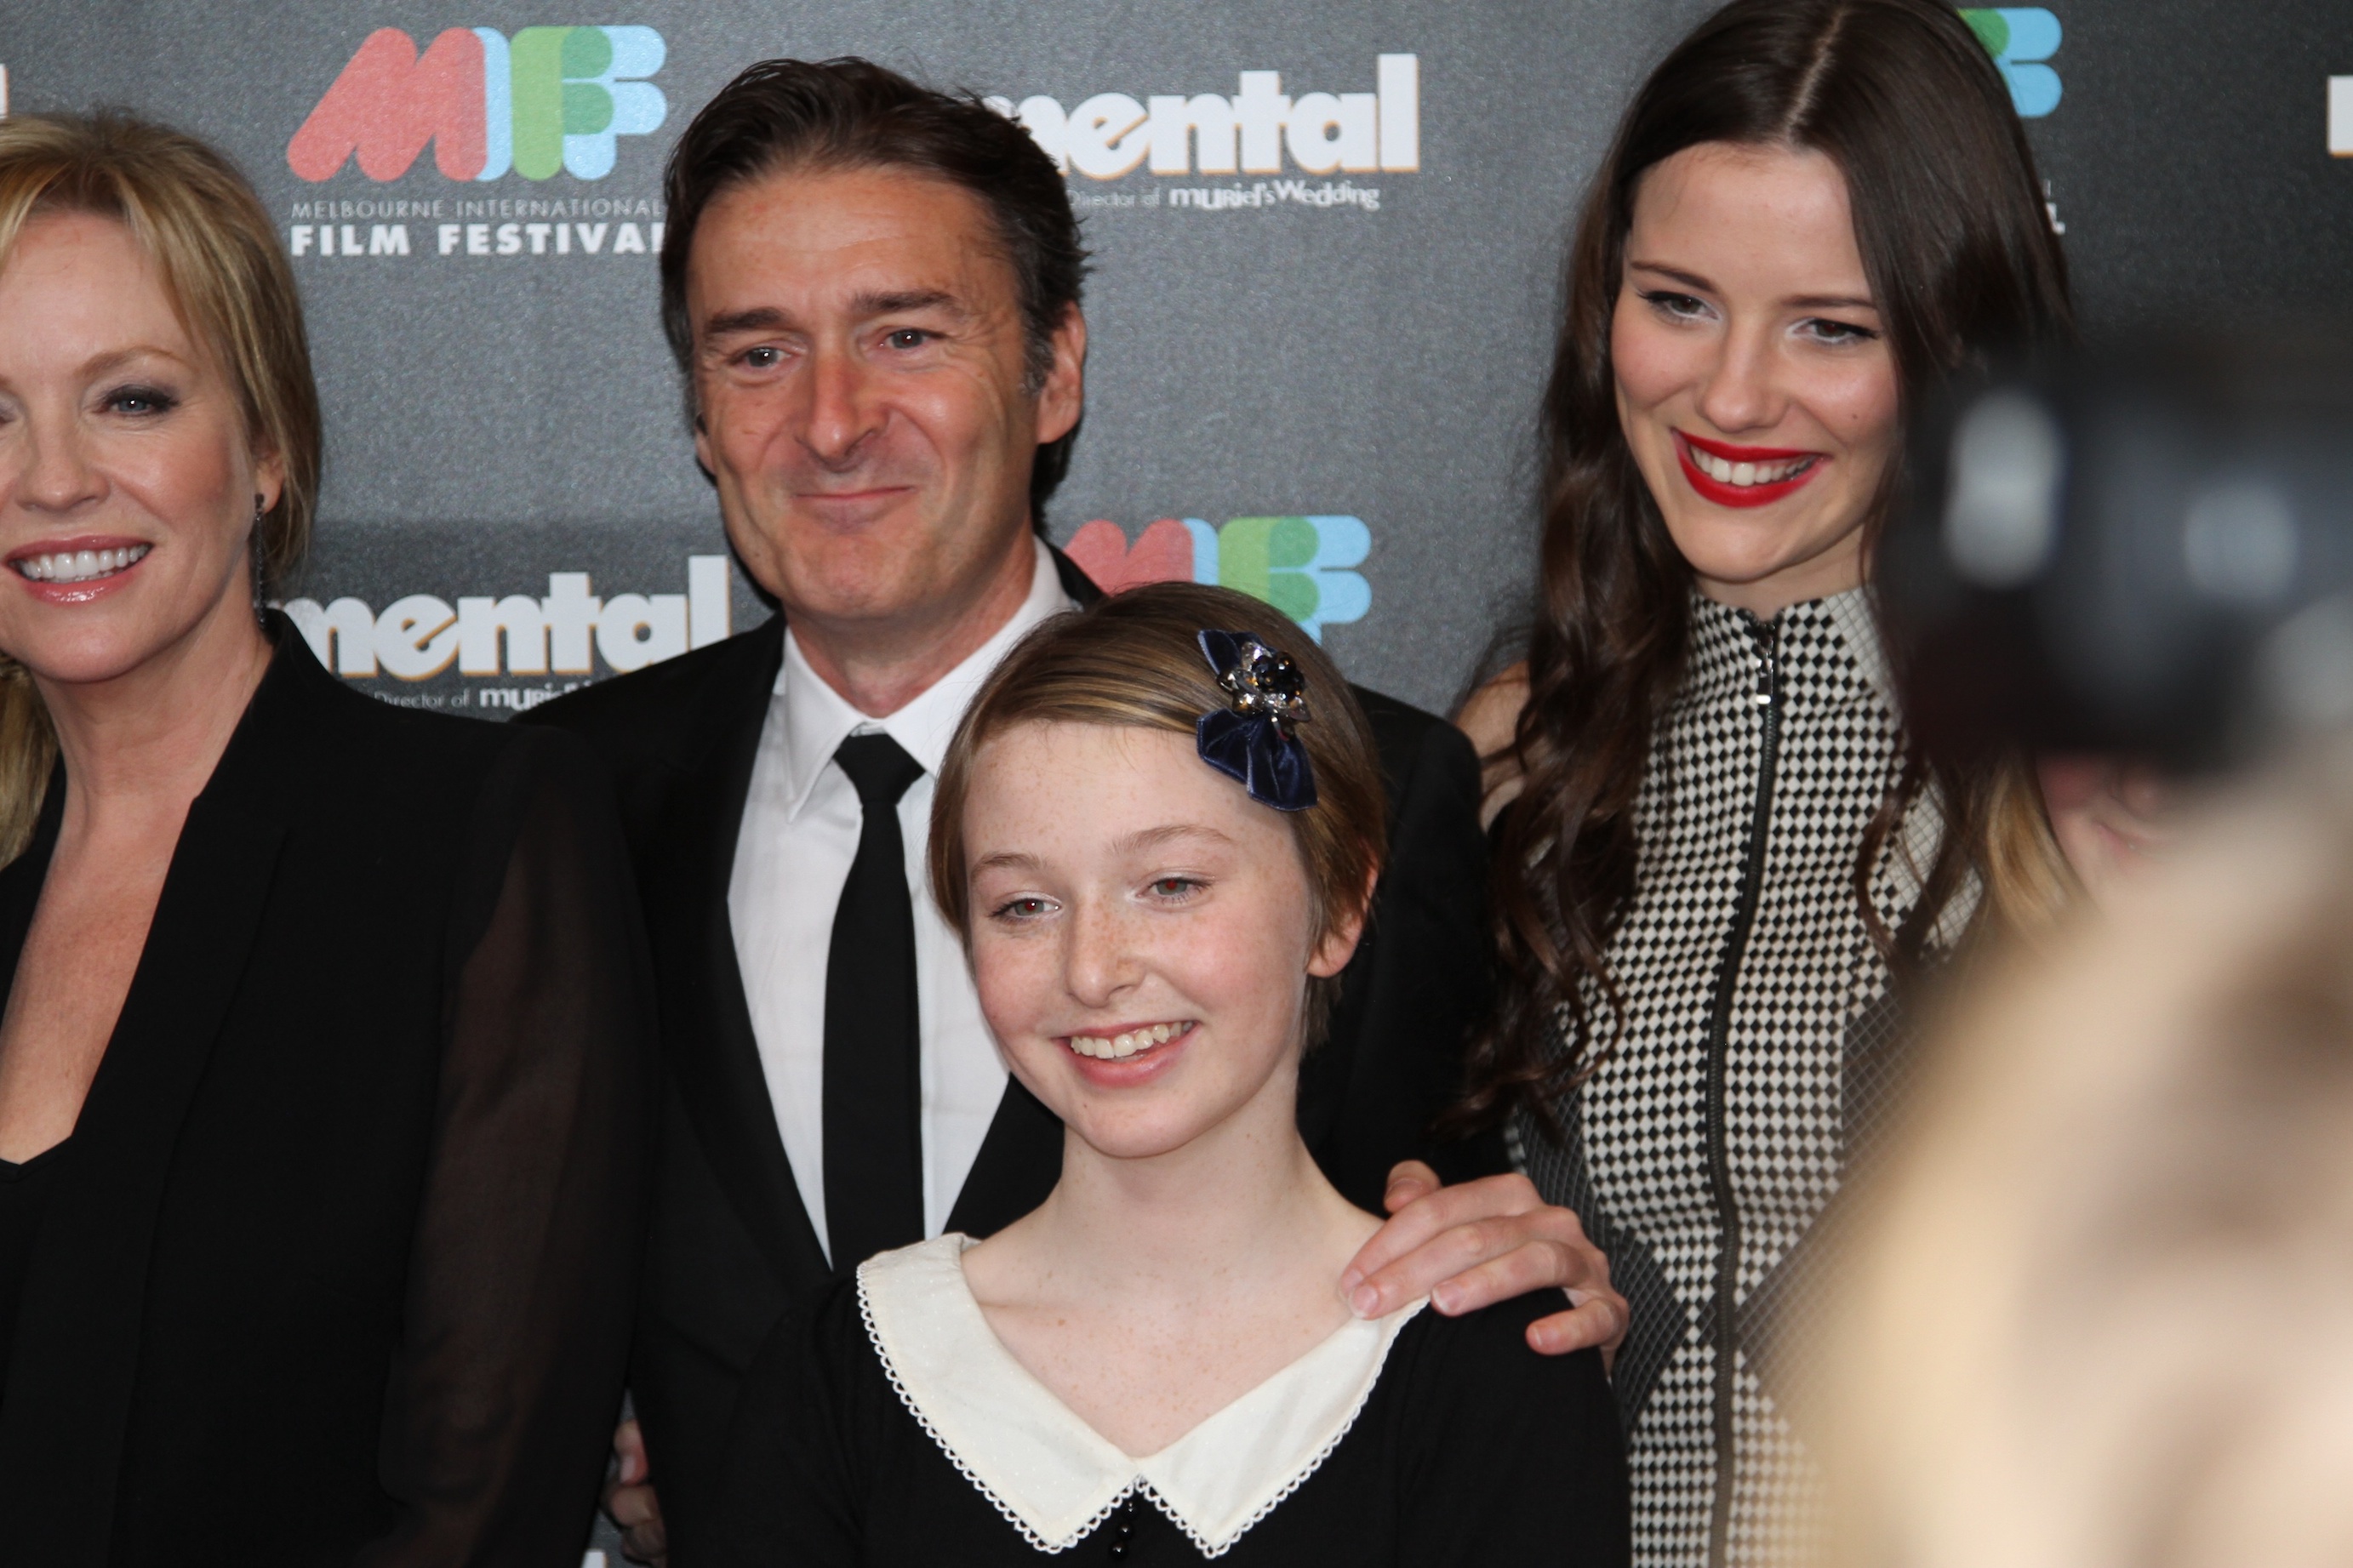 Mental Melbourne Premier. Bethany Whitmore with PJ Hogan, Rebecca Gibney and Lily Sullivan - 2012